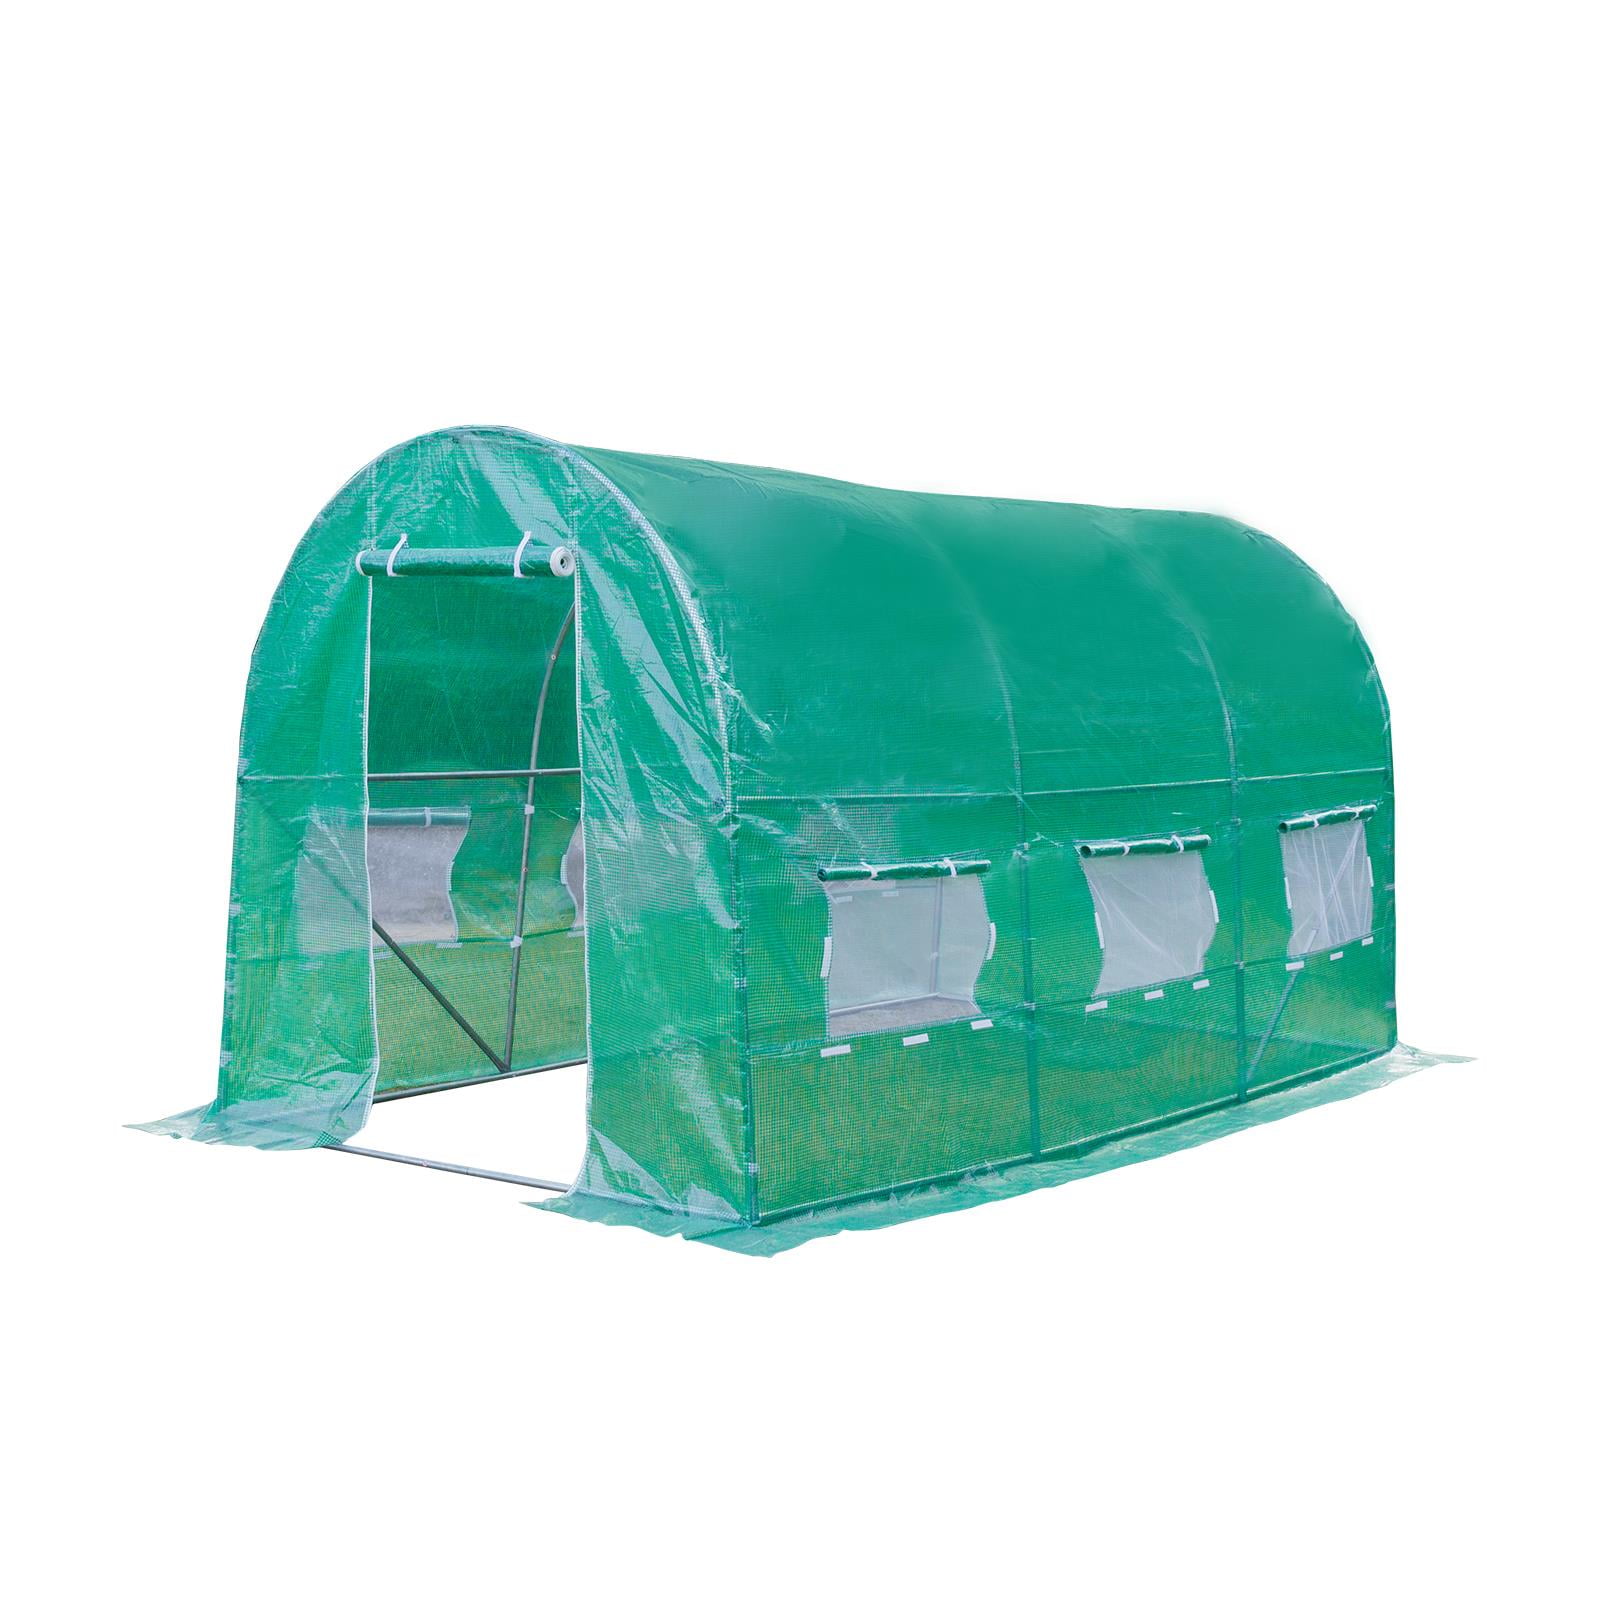 SHANGXING Walk in Greenhouse Replacement Cover with Roll-Up Zipper Door-28x56x76 Inch PE Plant Gardening Greenhouse Cover for Gardening Plants Cold Frost Protection Wind Rain Proof No Frames Include